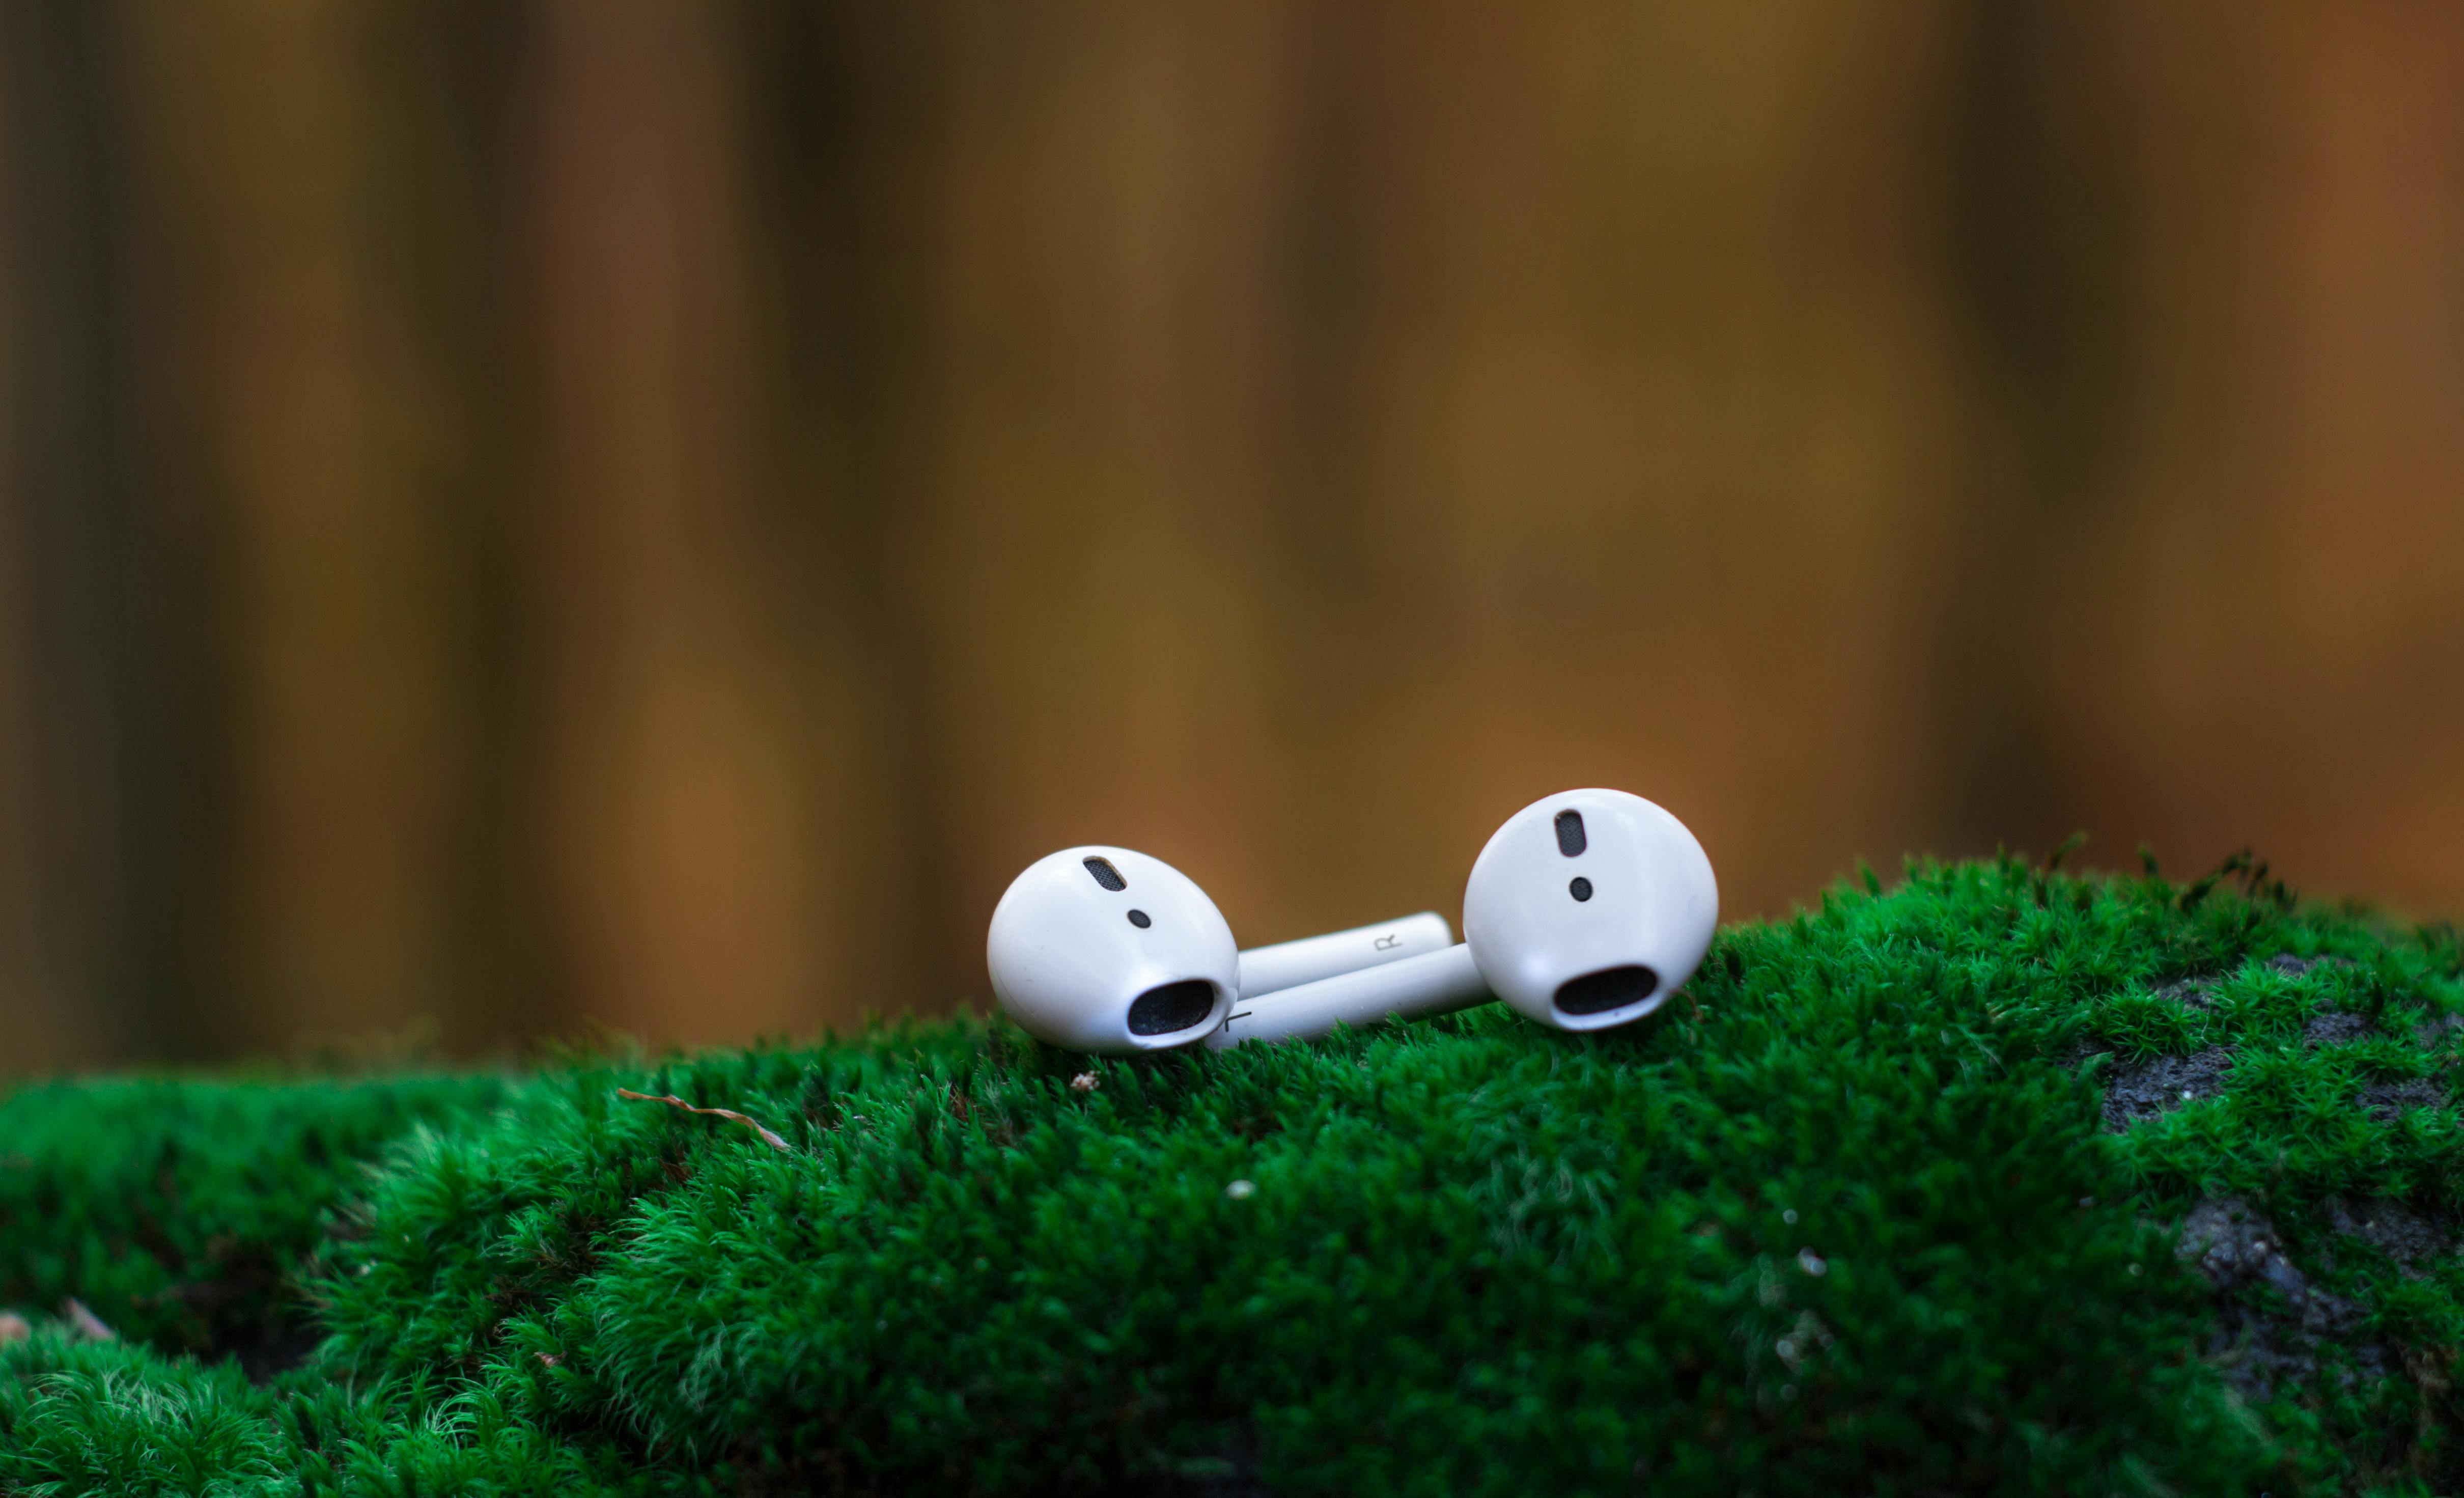 HD airpods wallpapers  Peakpx